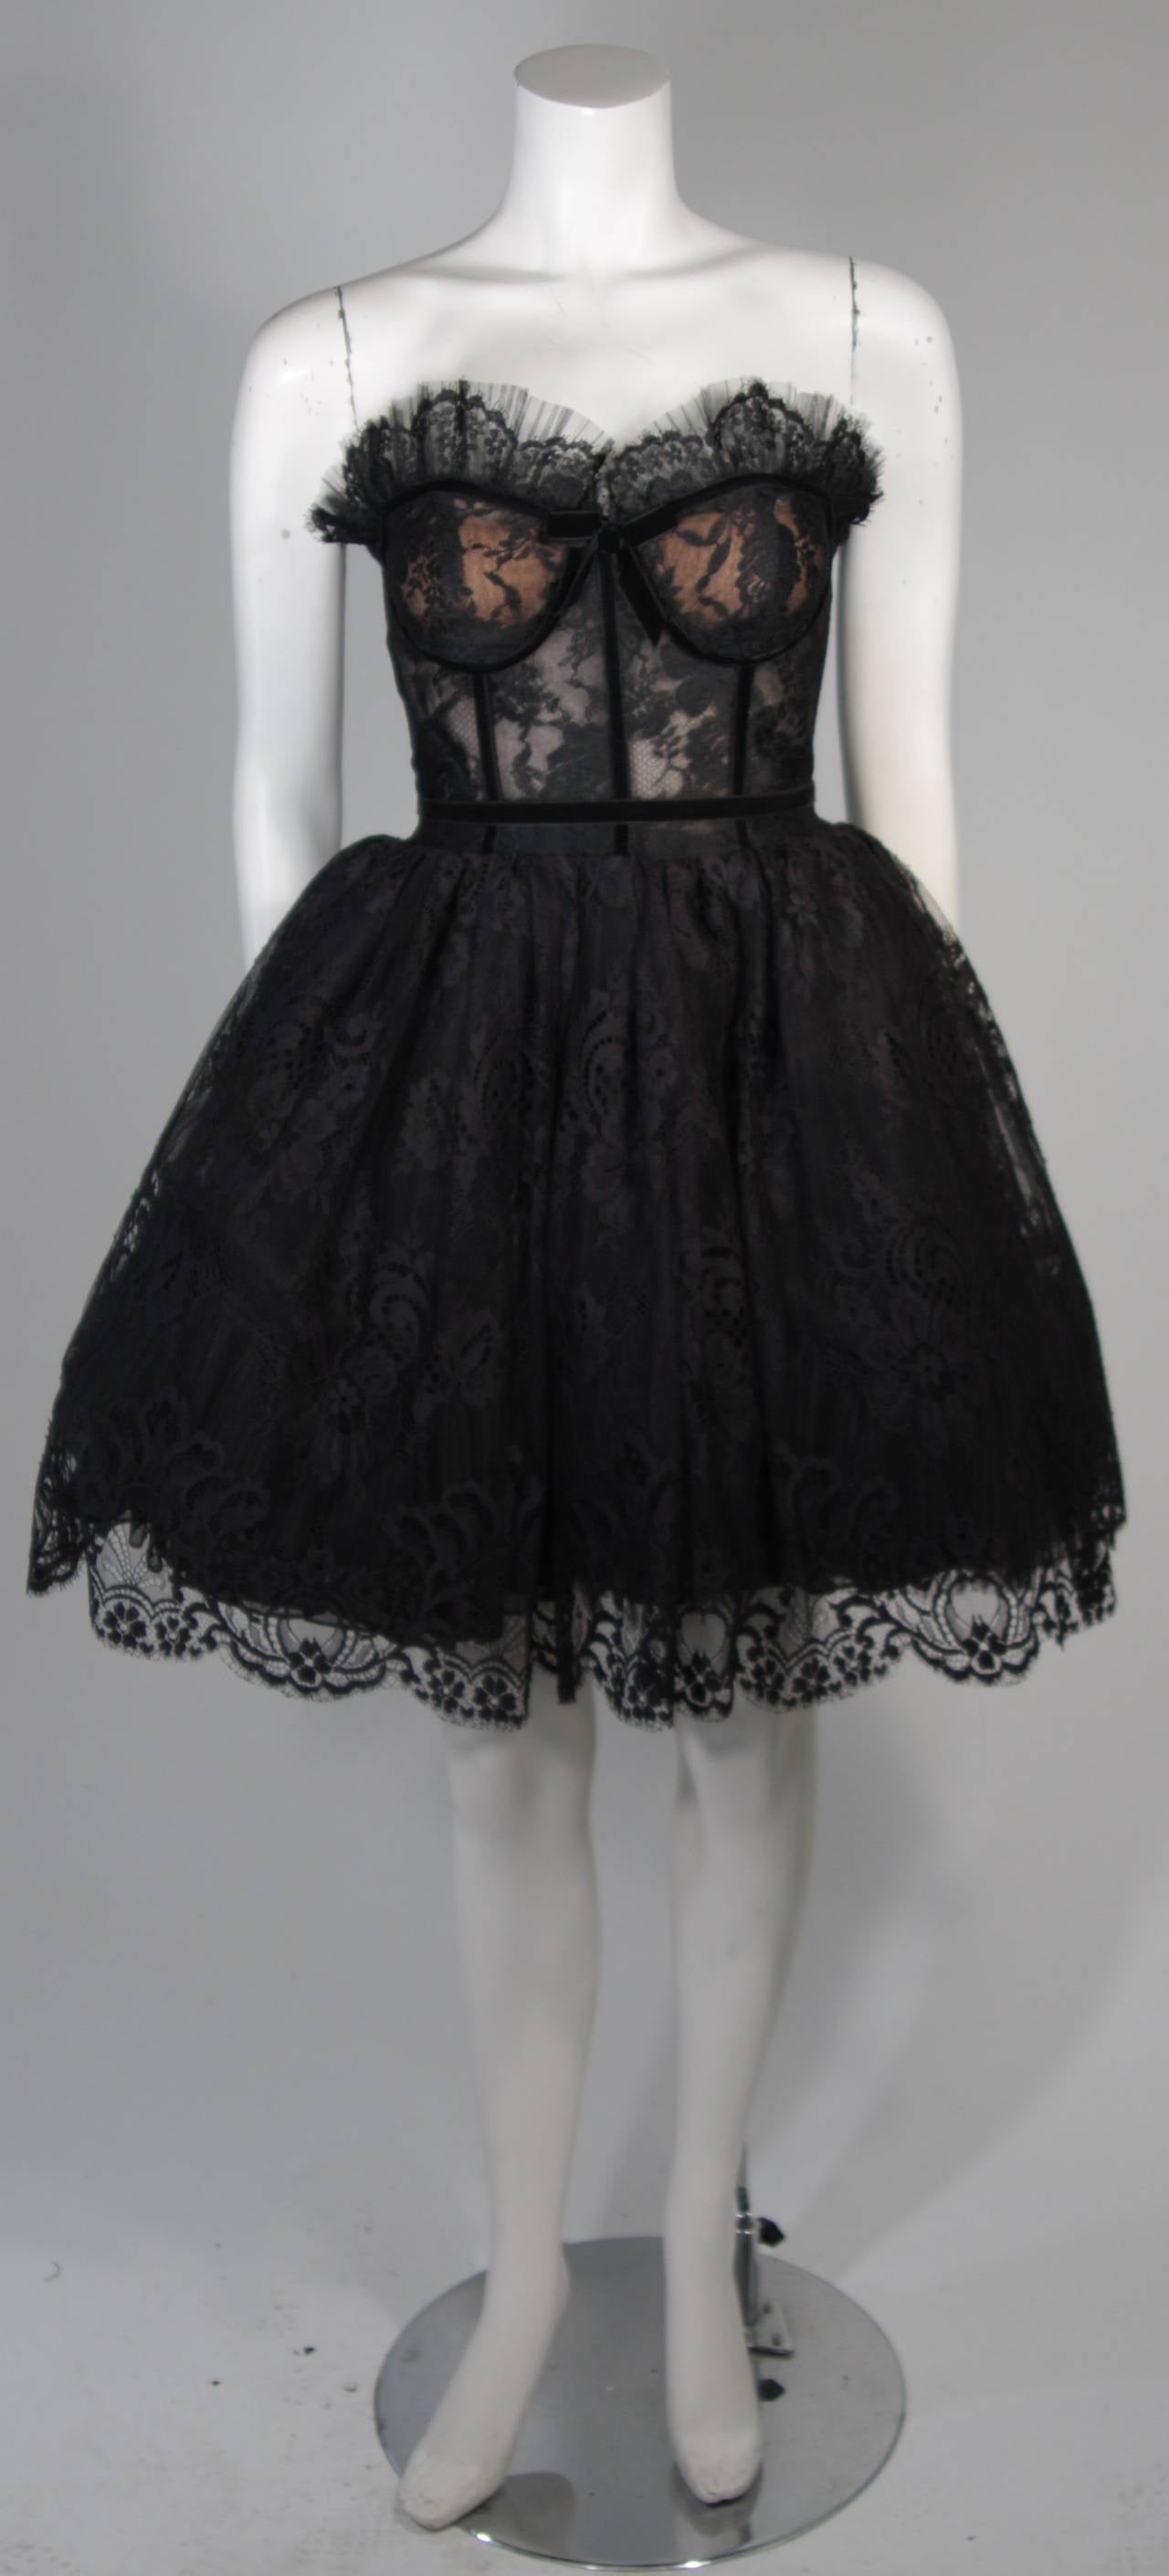 This vintage cocktail gown is composed of black lace and features scalloped edges as well as velvet trim. There are layers of crinoline for add volume and a structured bodice with boning. There is a center back zipper closure. In excellent